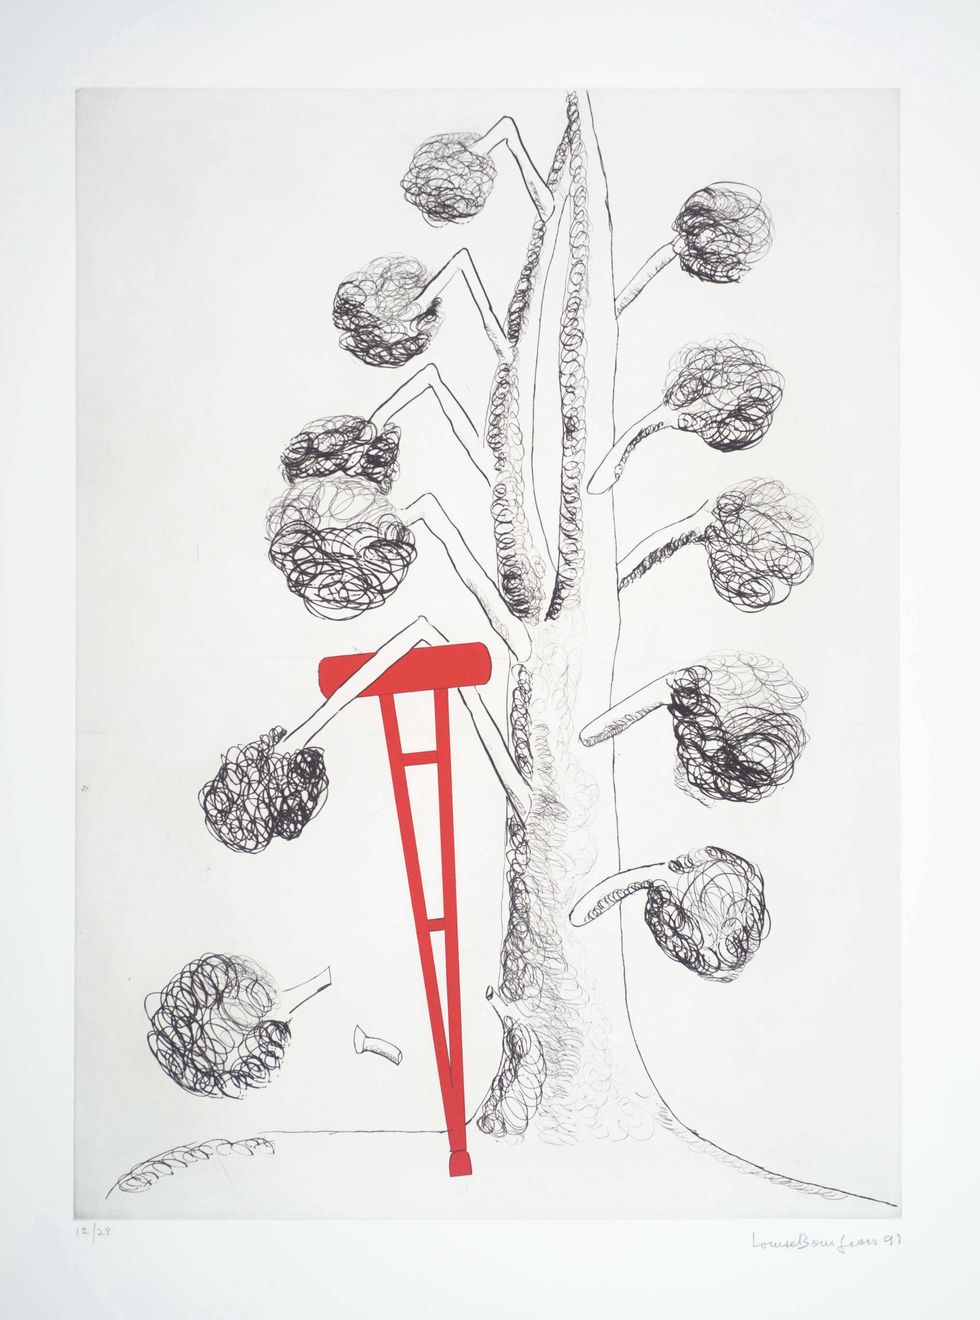 louise bourgeois, tree with red crutch,